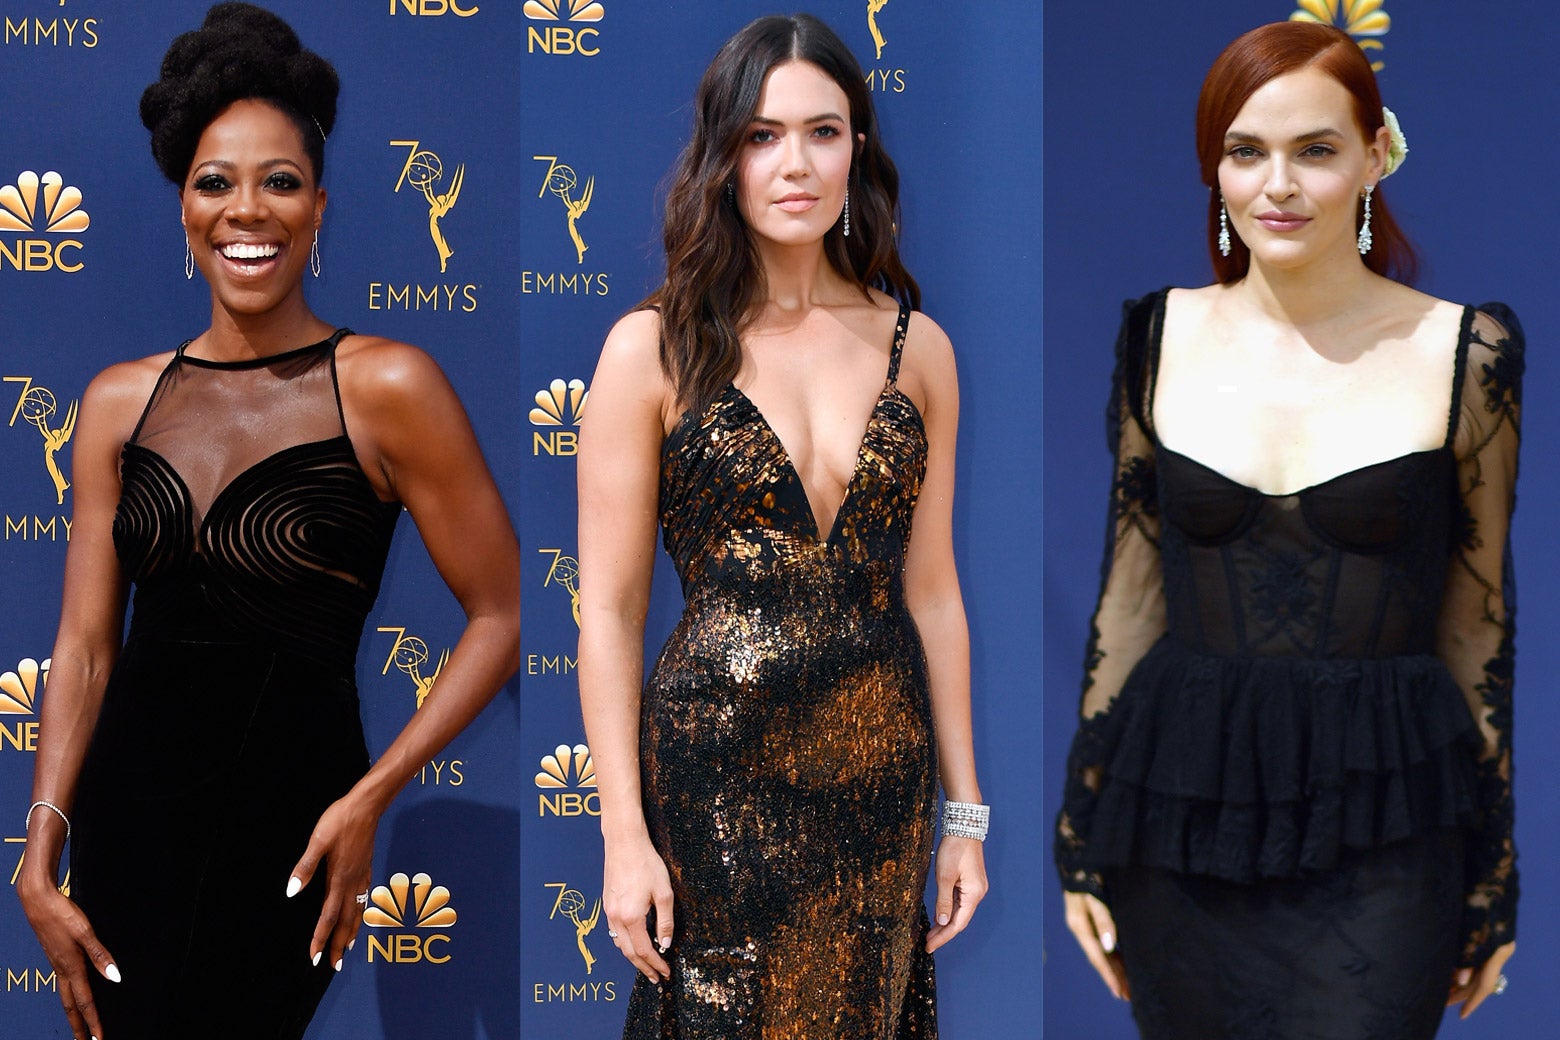 Yvonne Orji, Mandy Moore, and Madeline Brewer.